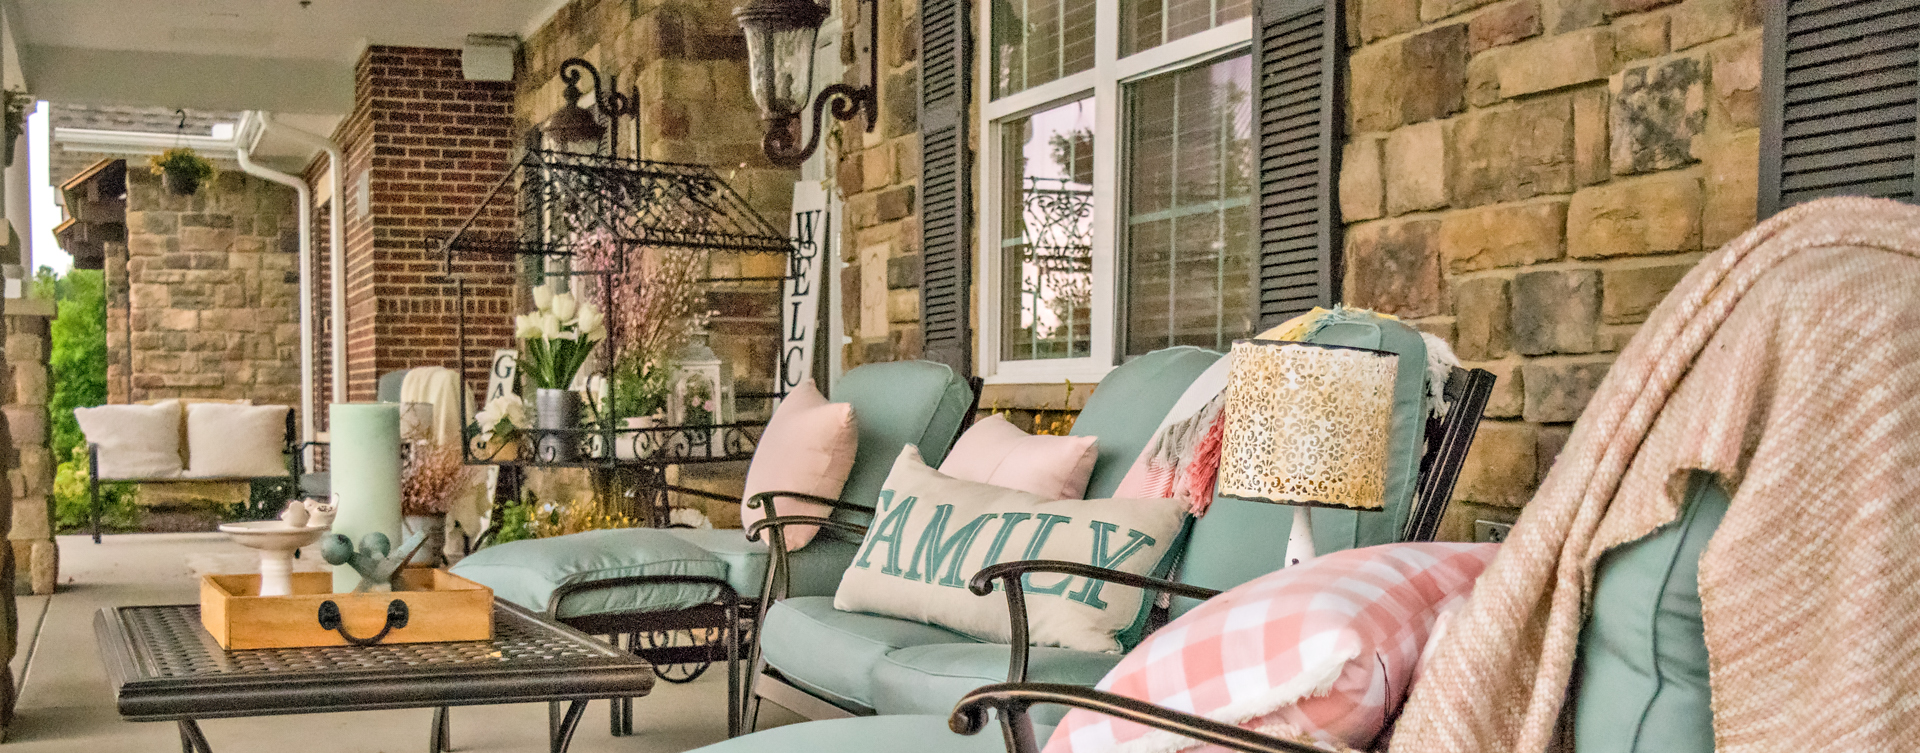 Enjoy conversations with friends on the porch at Bickford of Spotsylvania